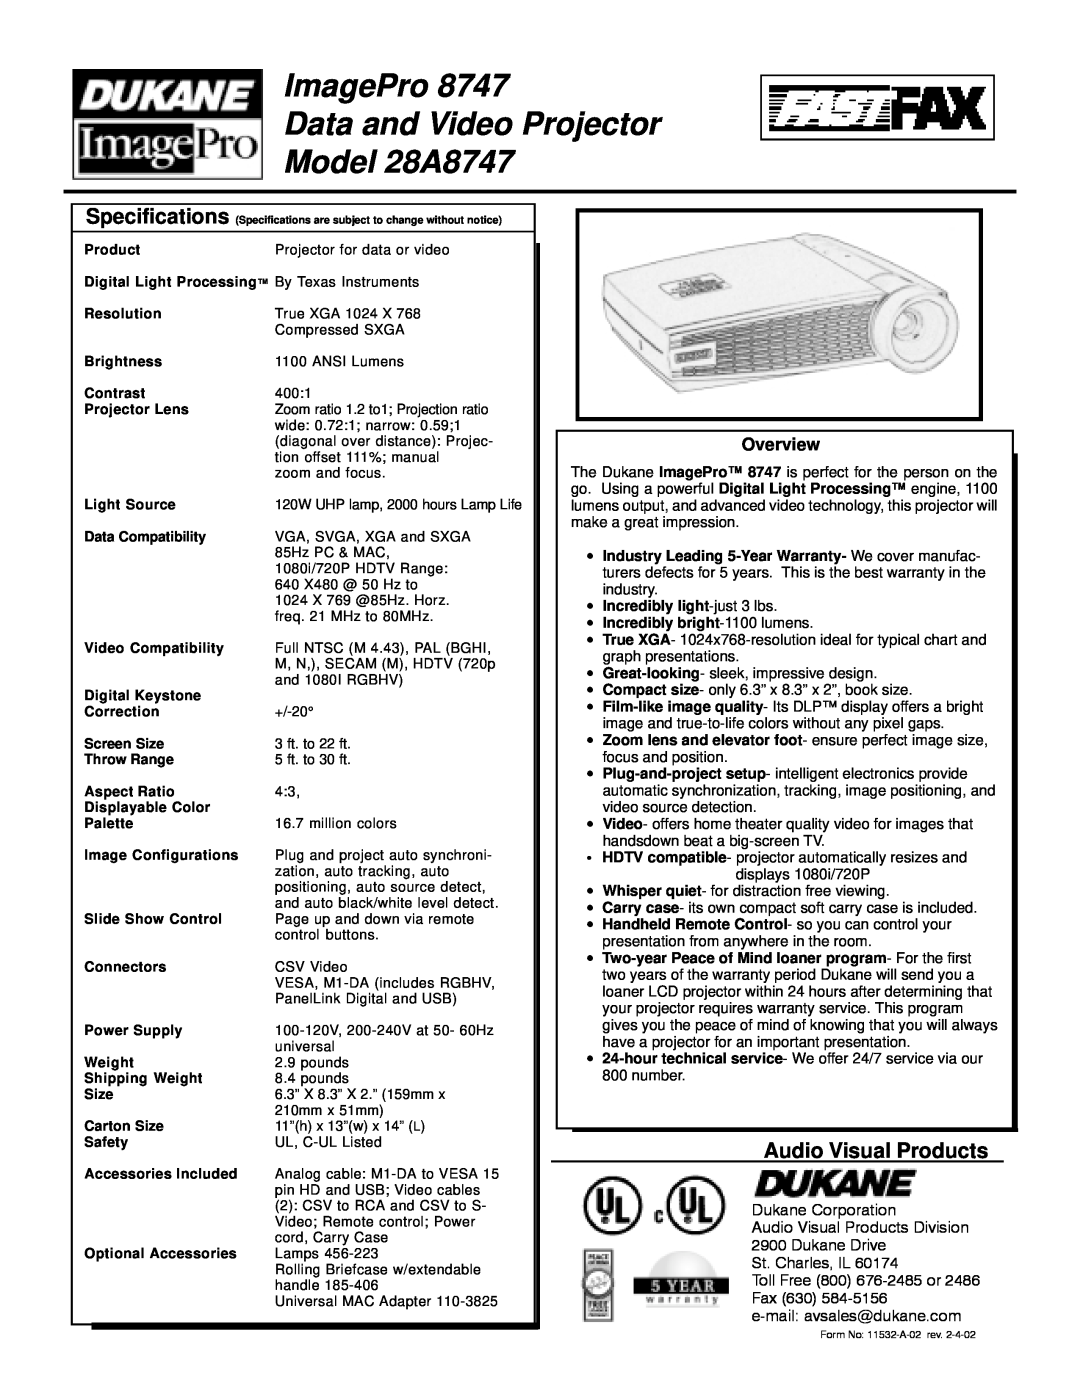 Dukane specifications ImagePro Data and Video Projector Model 28A8747, Audio Visual Products, Overview 